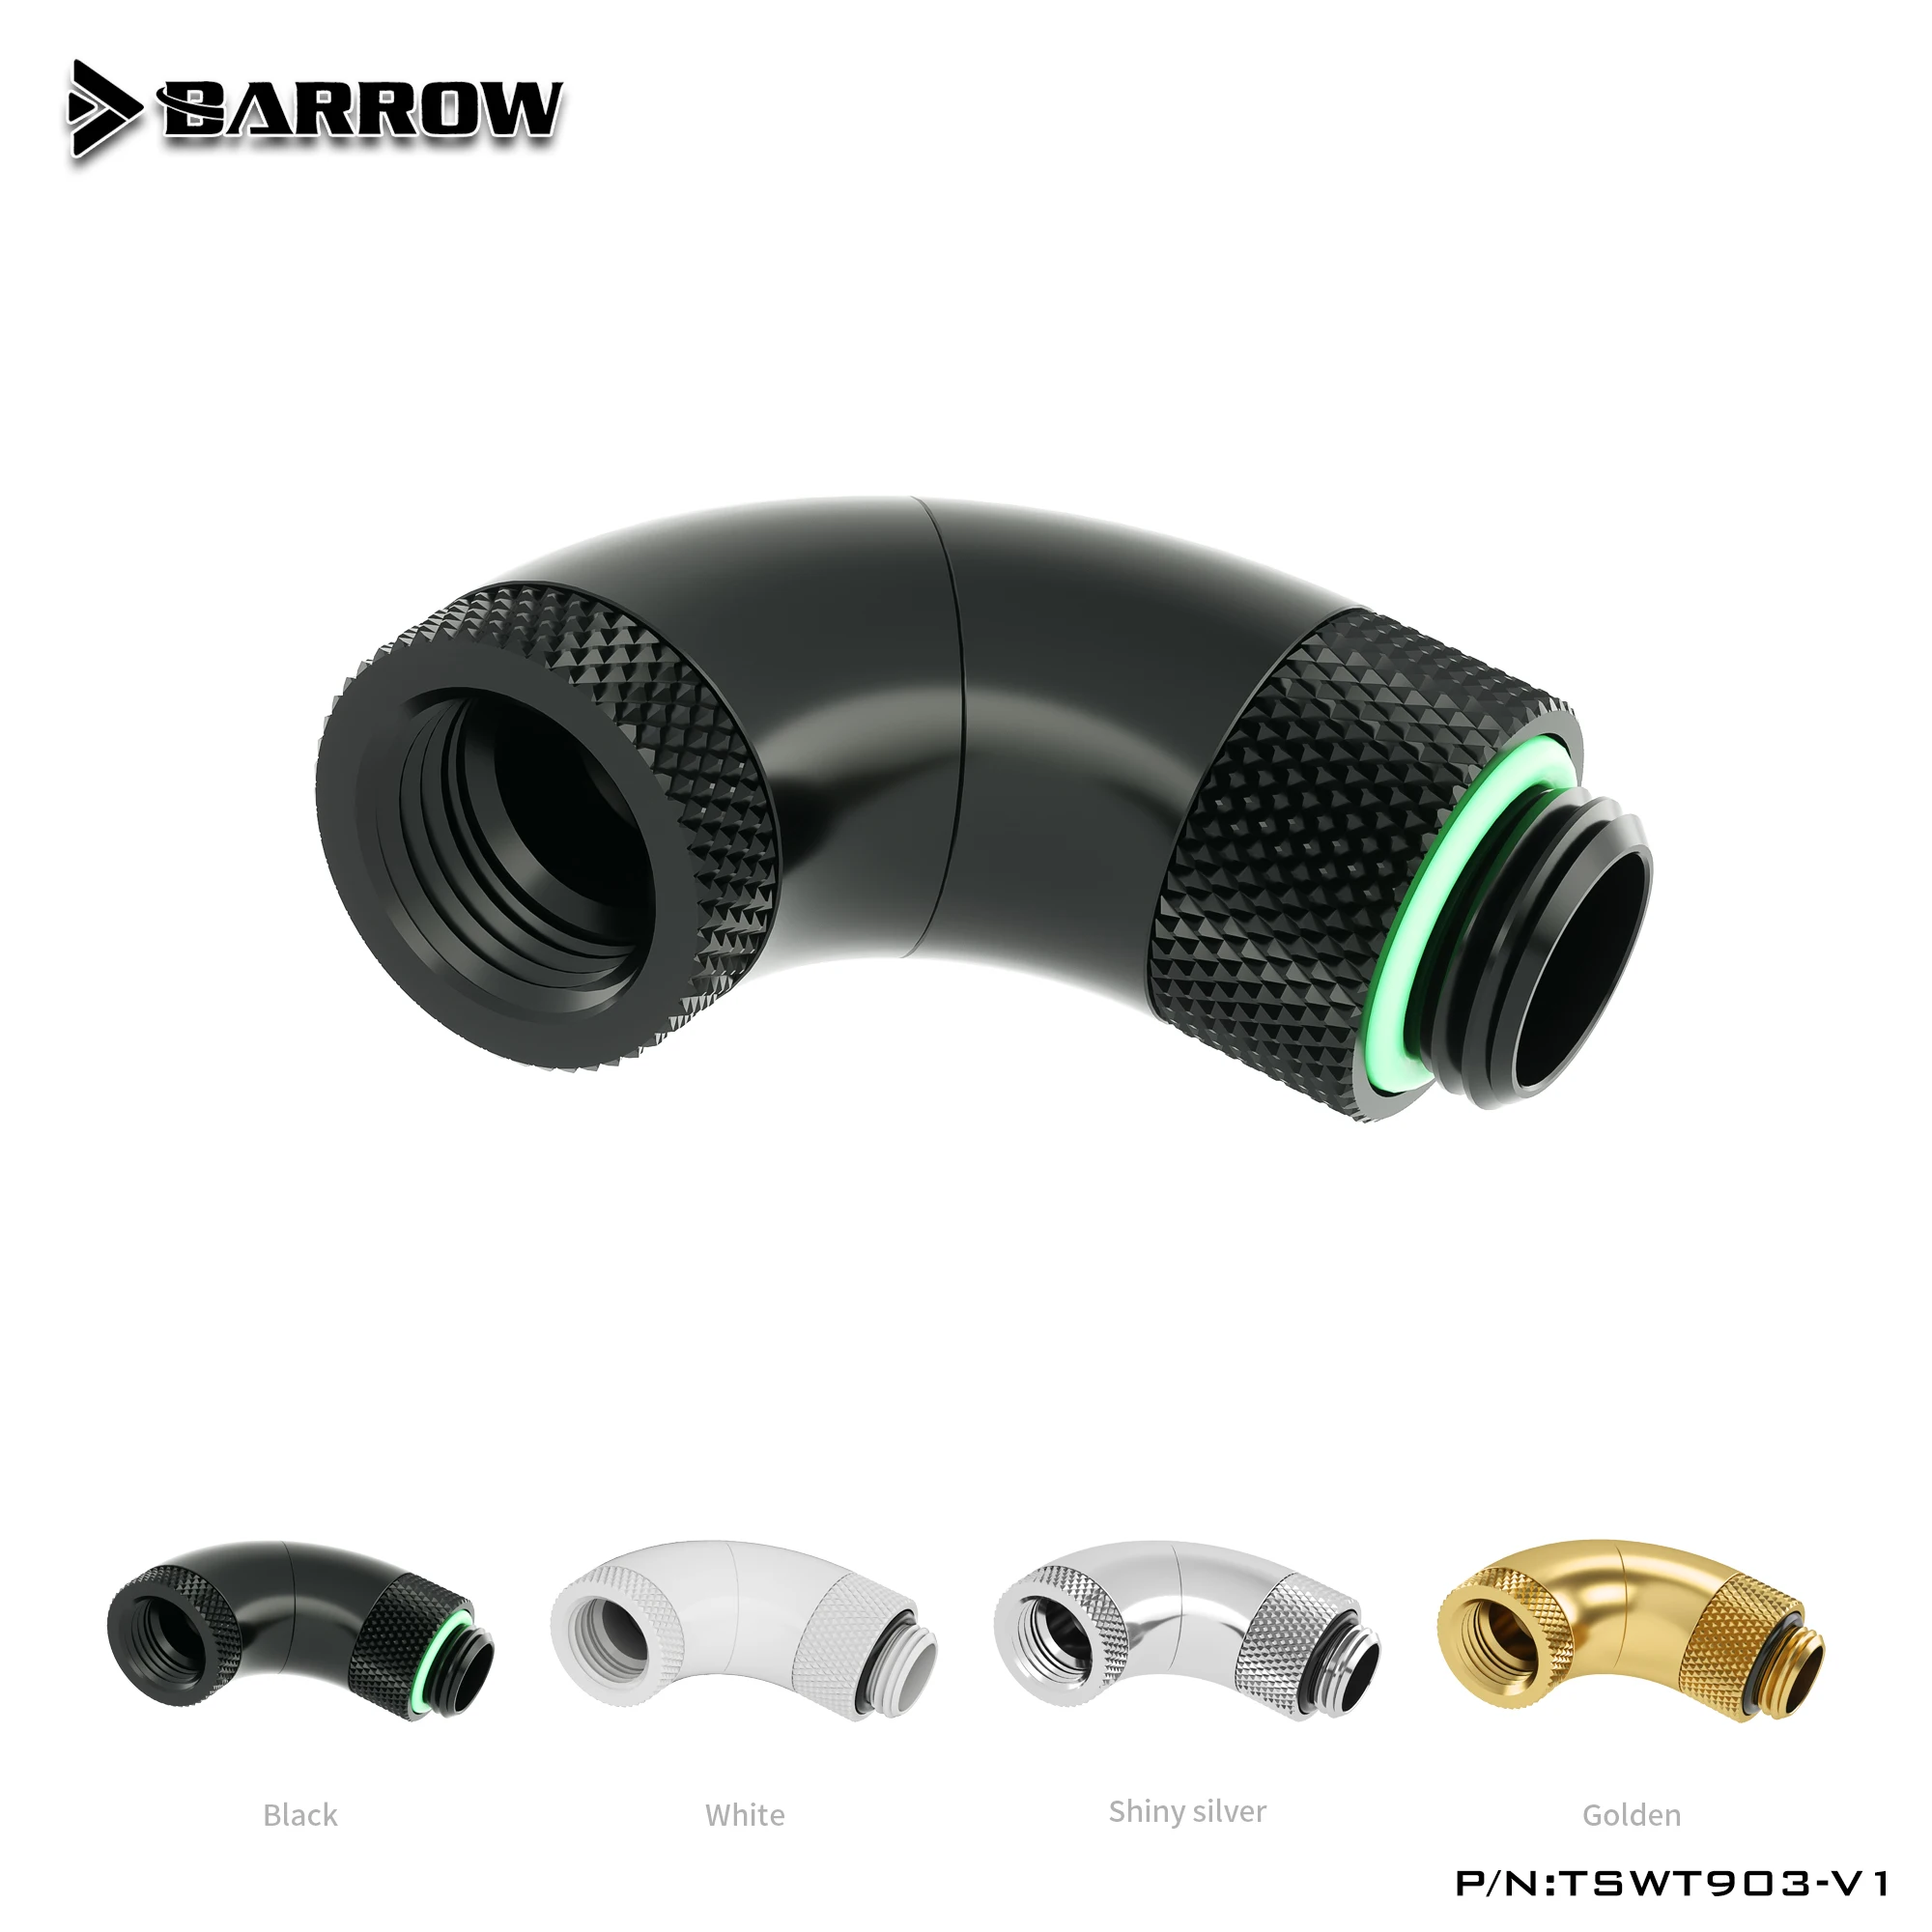 

Barrow TSWT903-V1 G1/4" White Black Silver Three Rotary 90-Degree 360 Degree Rotatable IG1/4" Extender Water Cooling Fittings